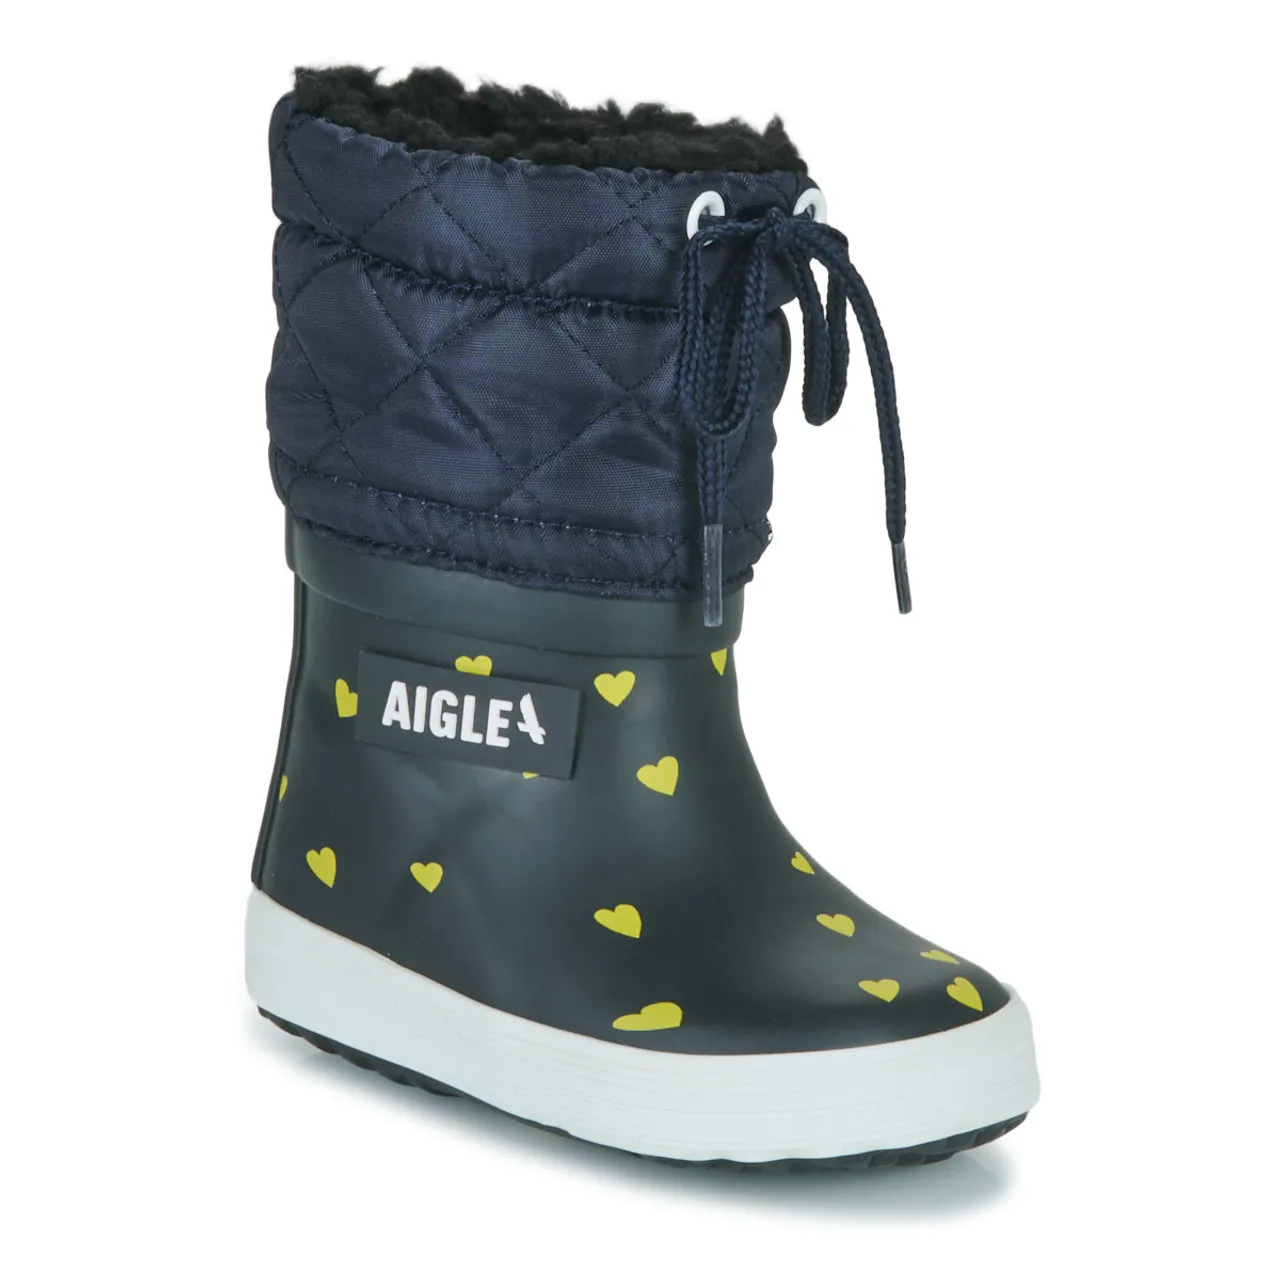 Aigle  GIBOULEE PT 2  boys's Children's Snow boots in Marine